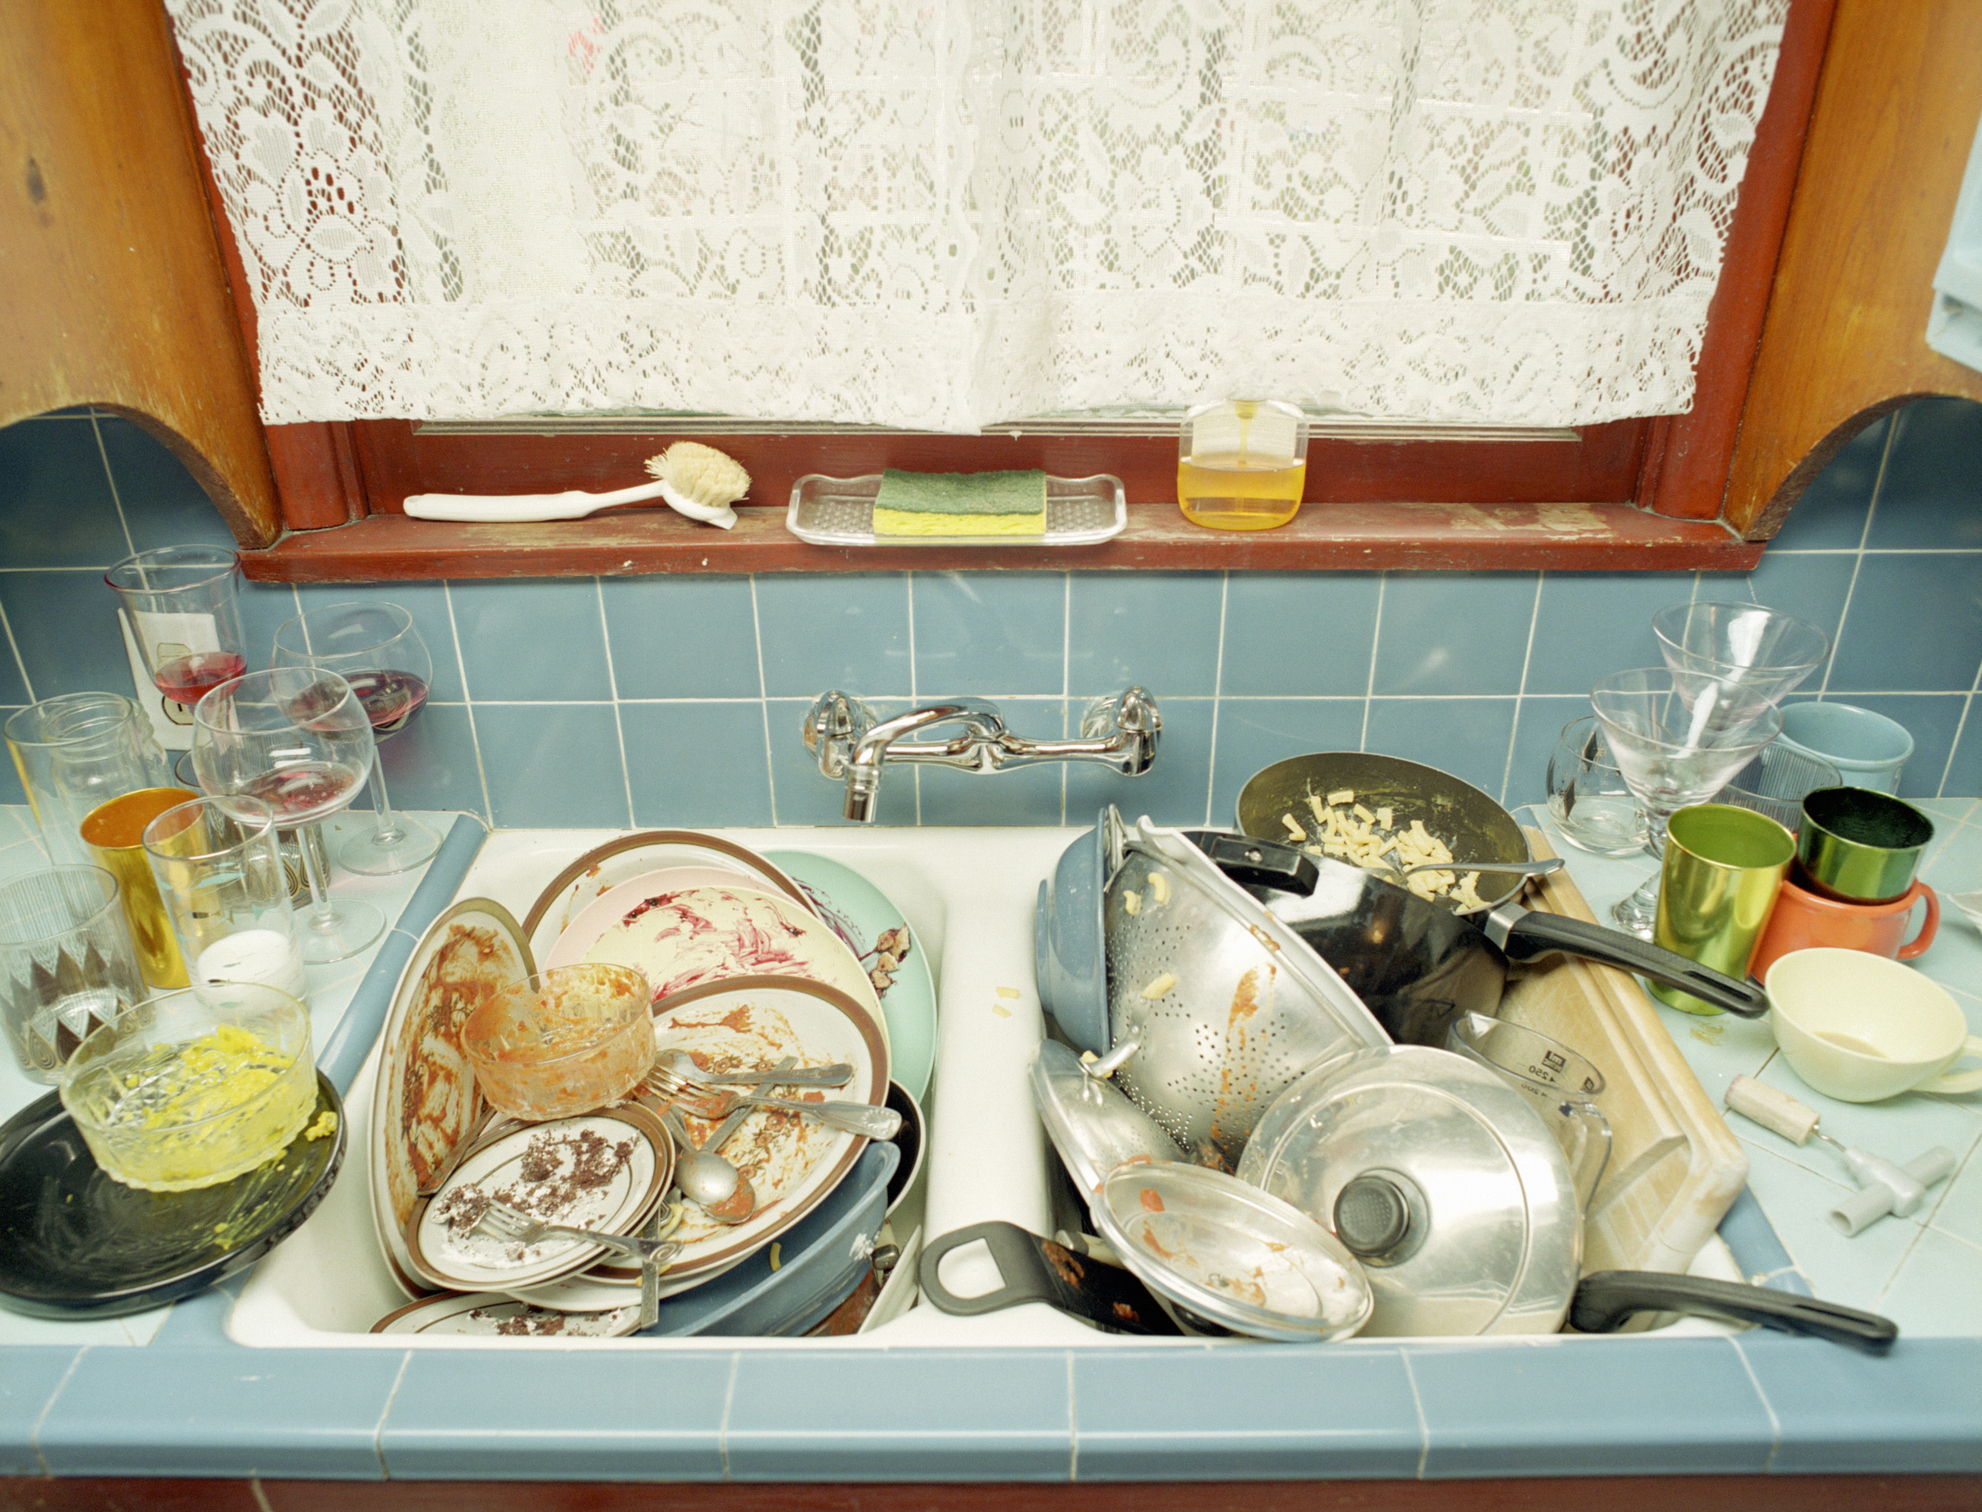 Kitchen sink filled with dirty dishes and utensils